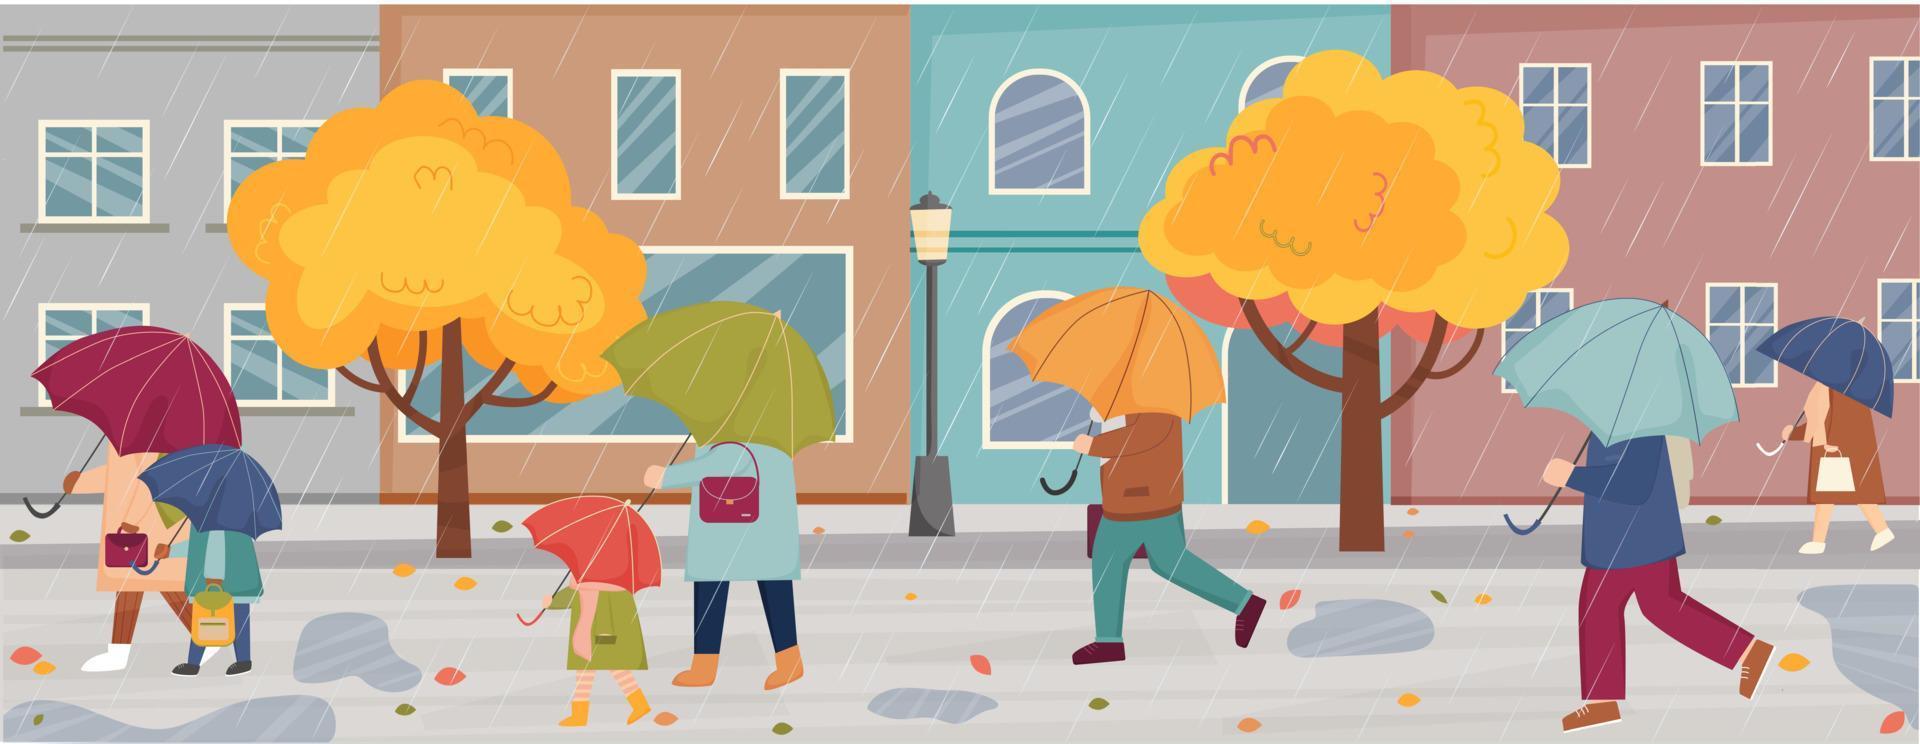 Autumn rainy weather in the city. People with umbrellas are walking under the rain. Autumn in the town. People are walking in rain on city street with buildings. Persons with umbrellas. vector